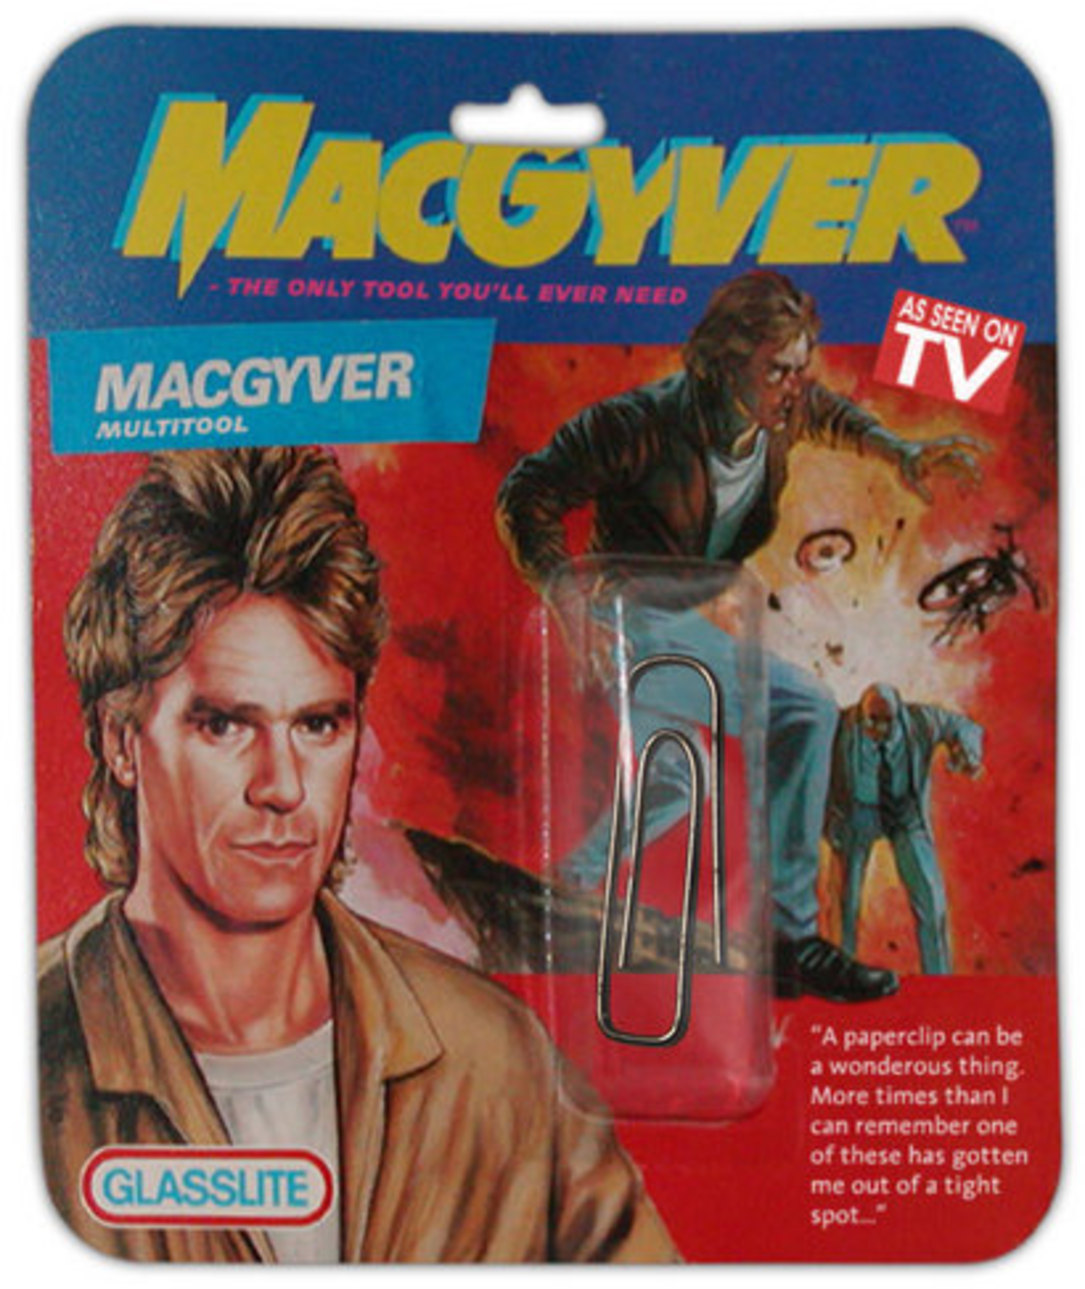 macgyver multitool - Icower The Only Tool You'Ll Ever Need As Seen On Macgyver Multitool "A paperclip can be a wonderous thing. More times than can remember one of these has gotten me out of a tight spot." Glasslite